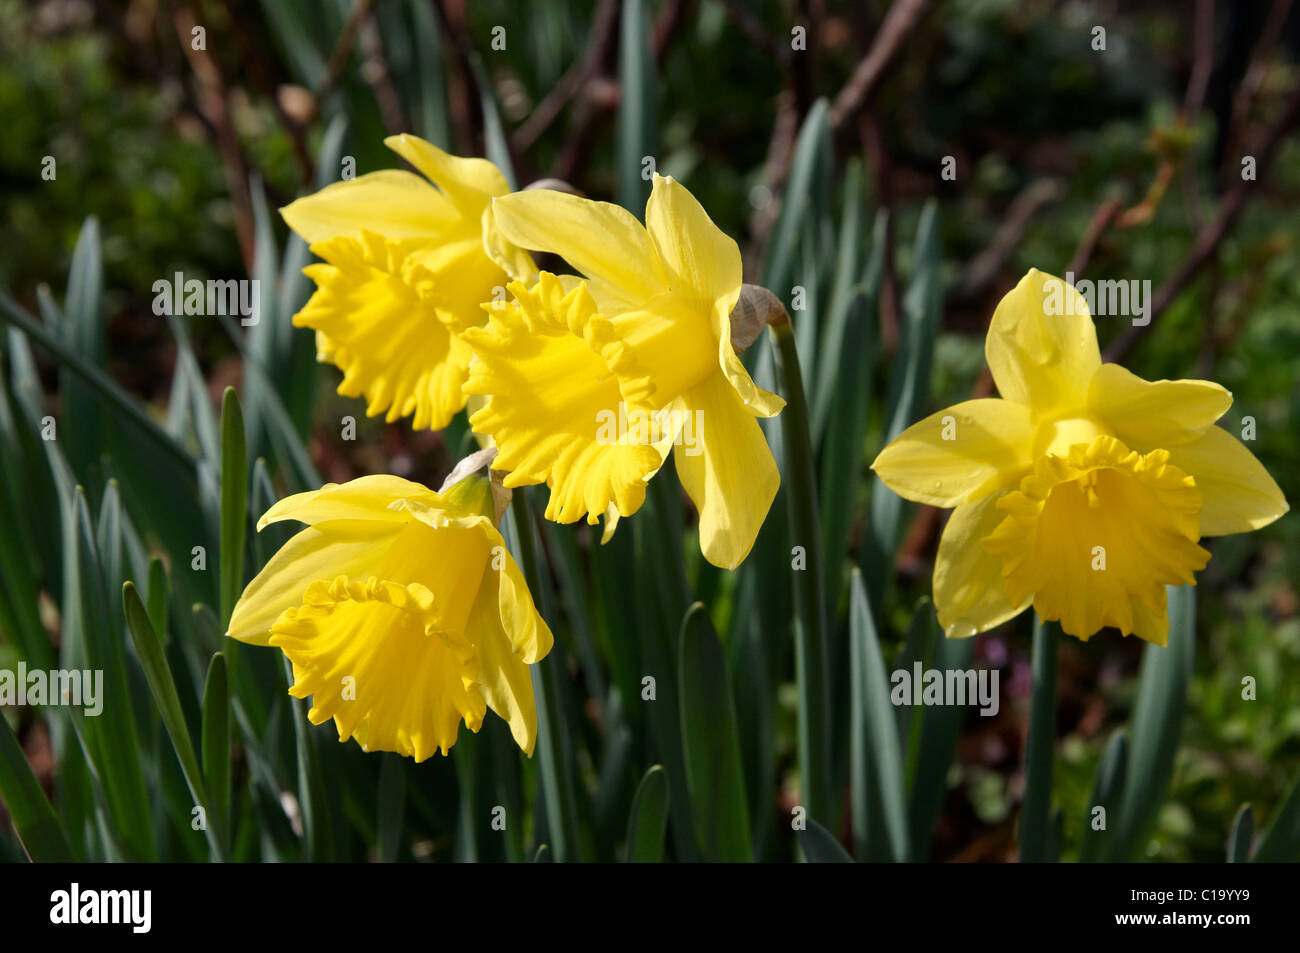 Spring daffodils of the King Alfred type Stock Photo